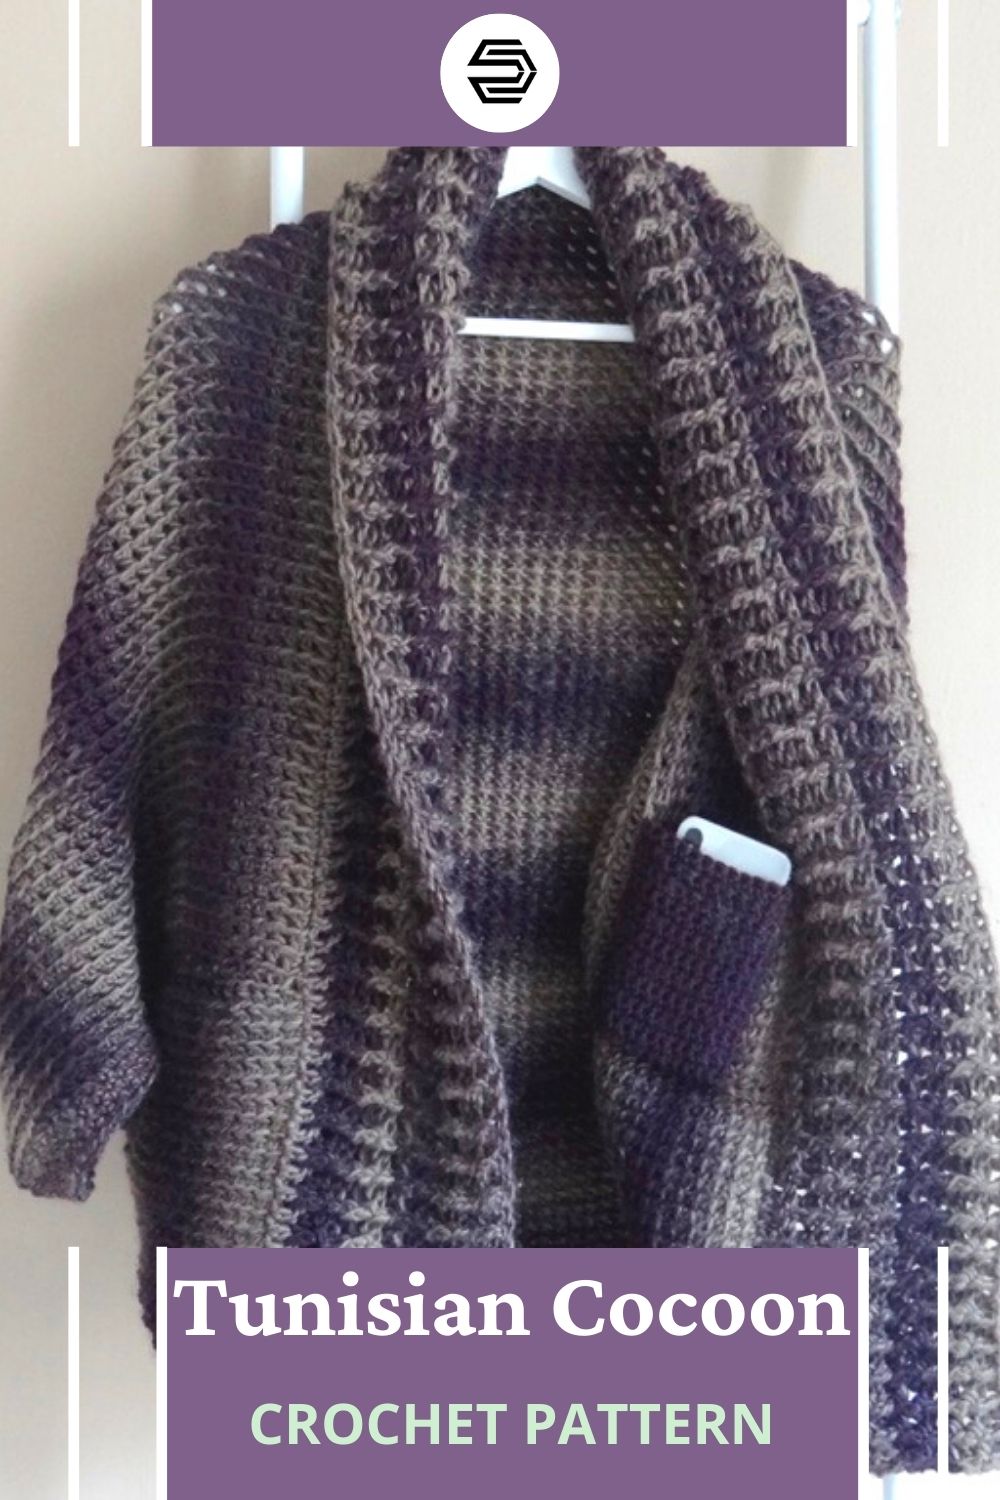 Learn how to make a tunisian half double crochet cocoon cardigan! As a size-inclusize pattern, everyone can create the perfect fit with the Abrazo Rayado Cocoon, a striped hug. Bonus, there's an inside pocket for holding your phone. 